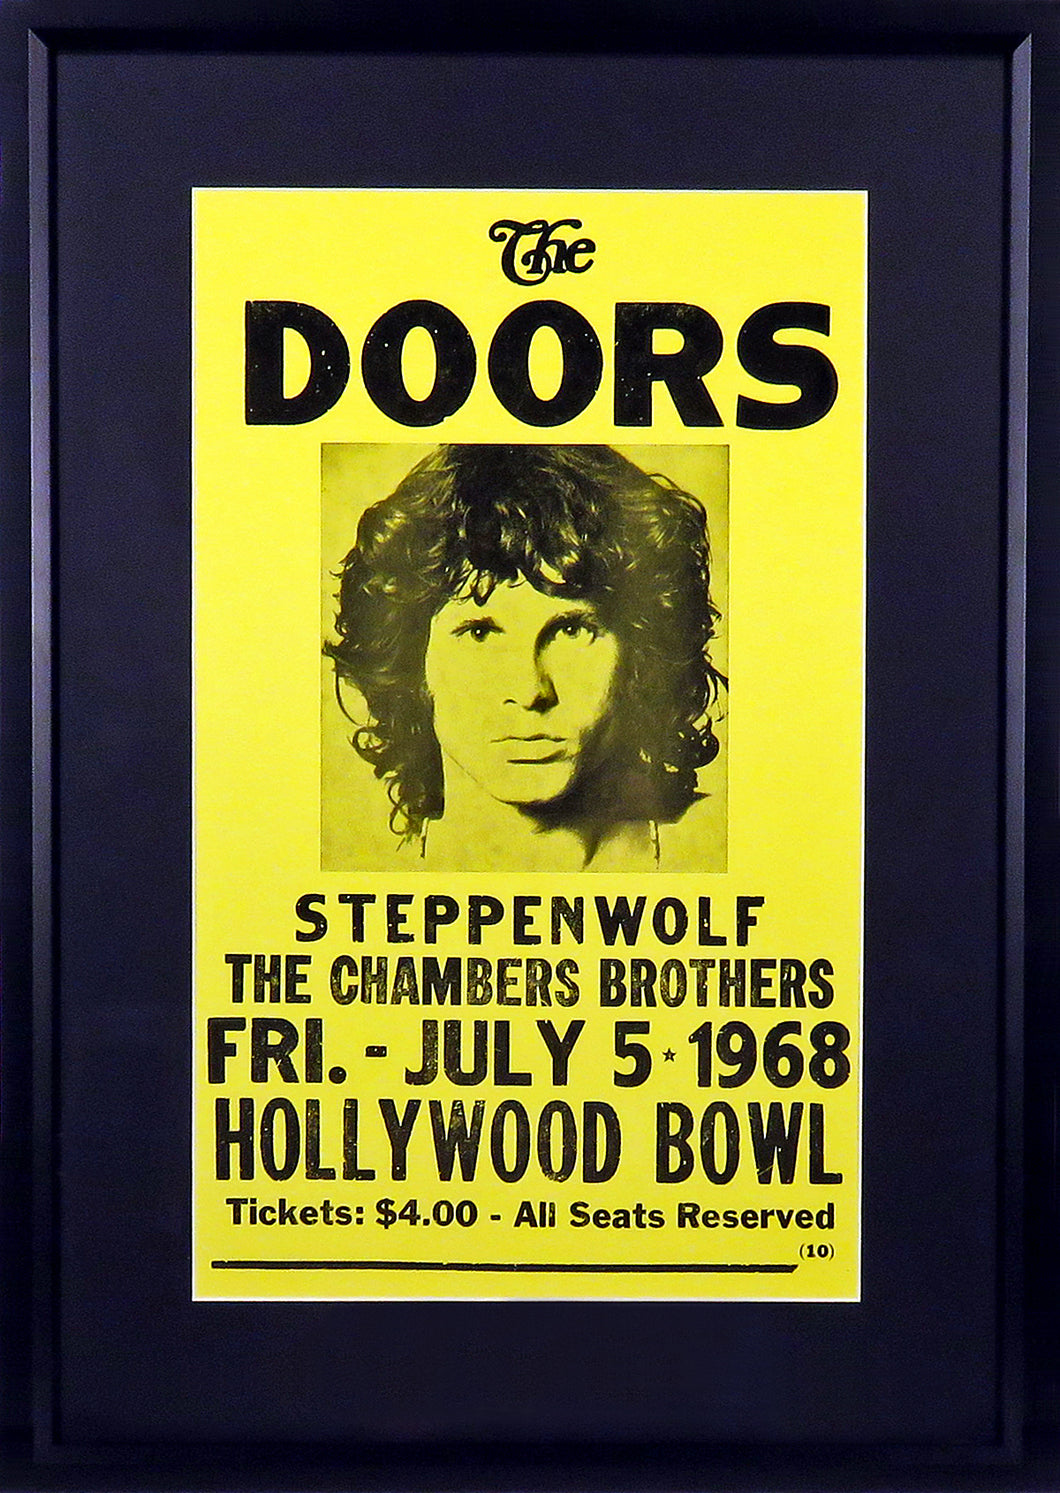 The Doors @ Hollywood Bowl Framed Concert Poster (Engraved Series)